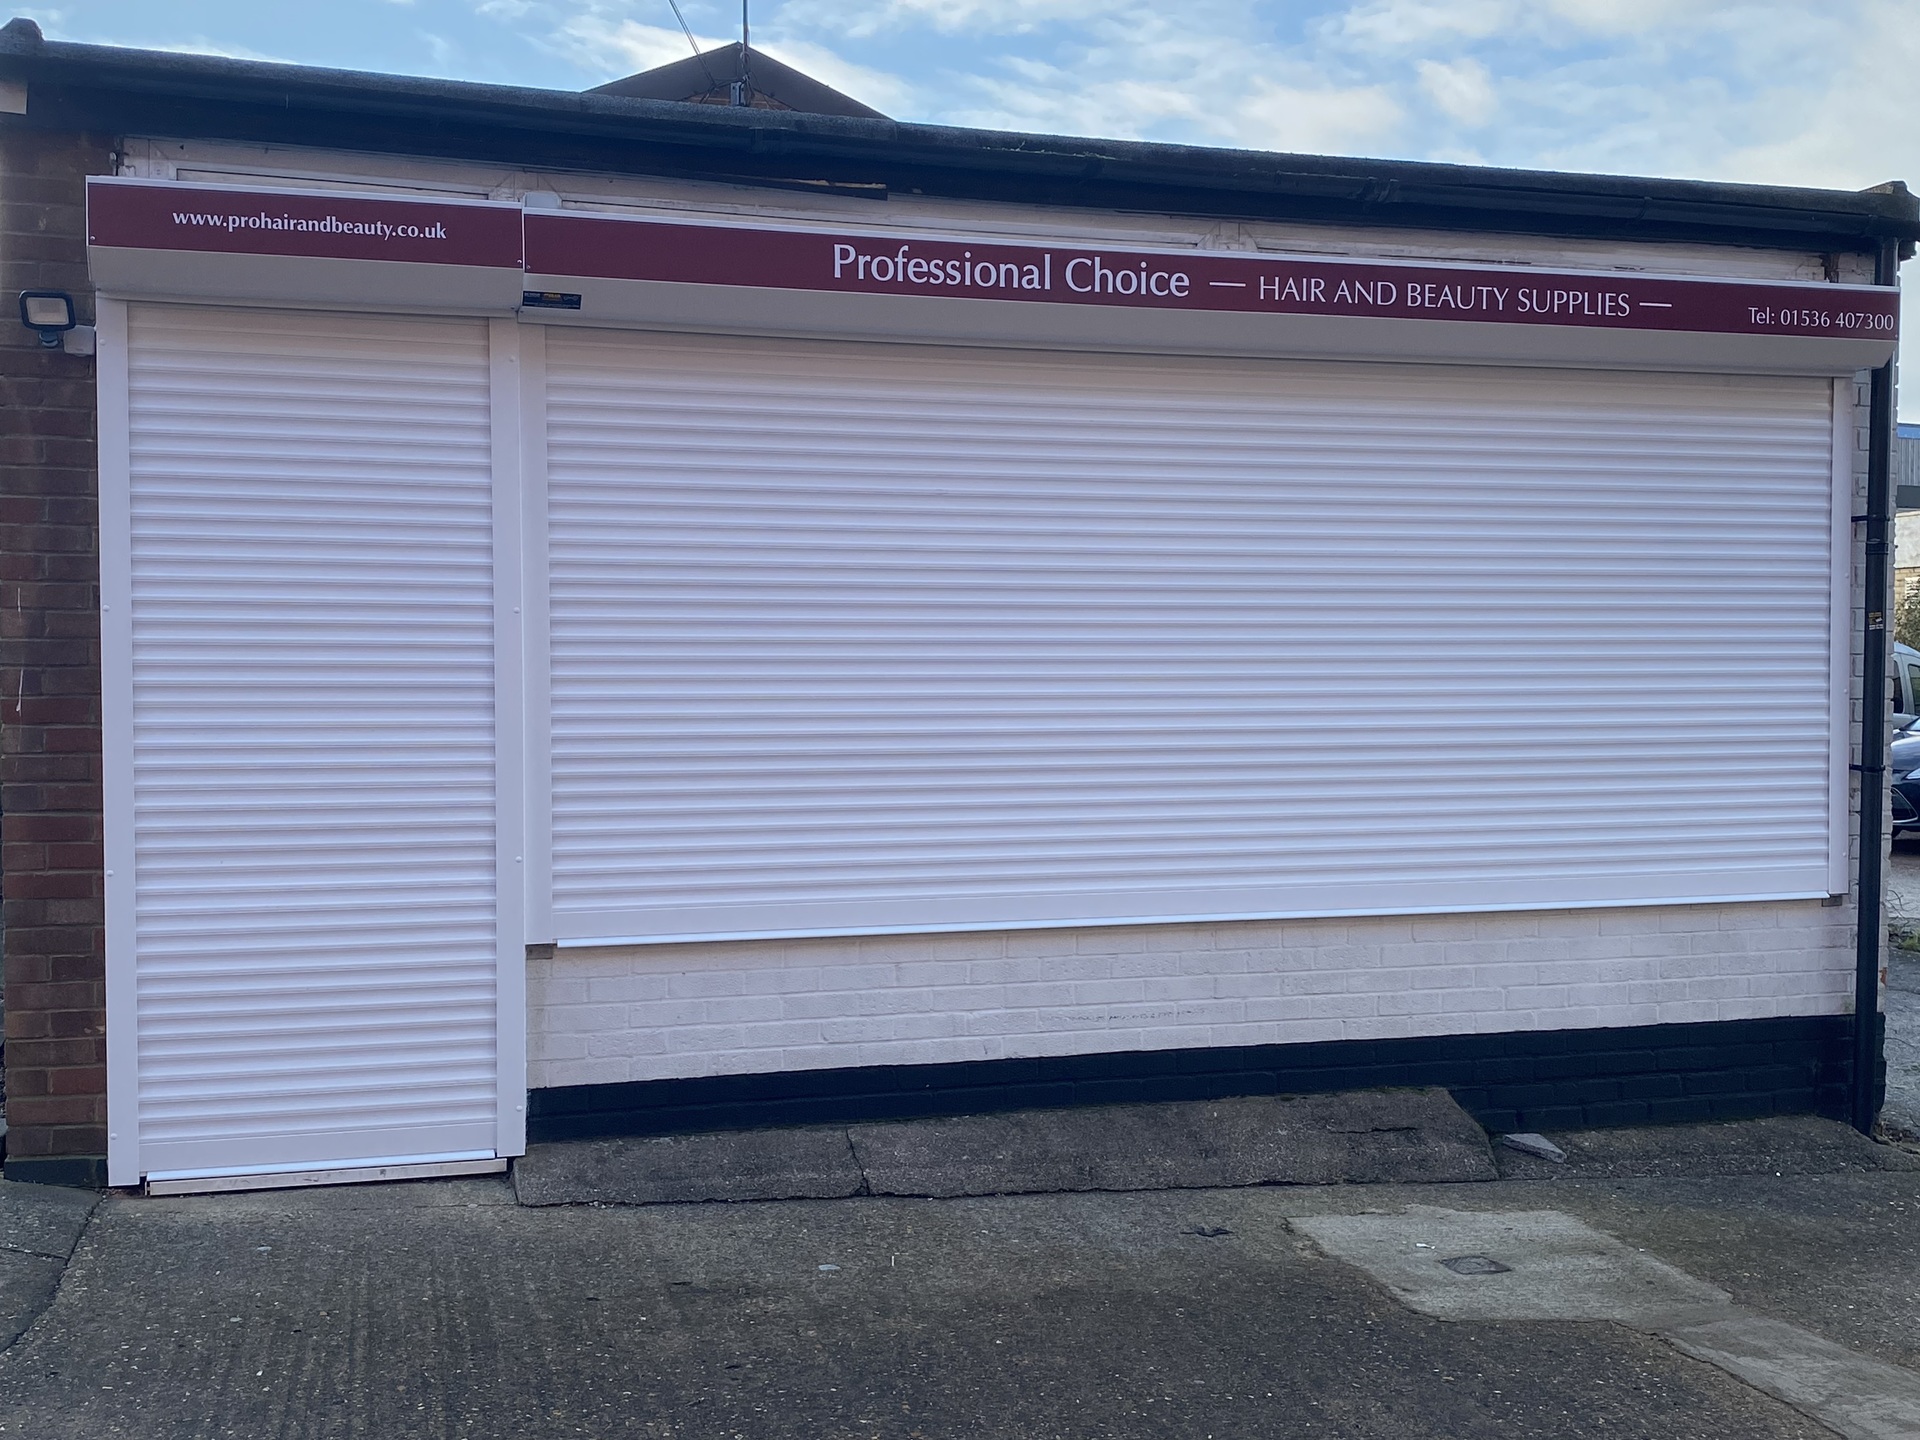 External Security shutters covering shop window and entrance in white